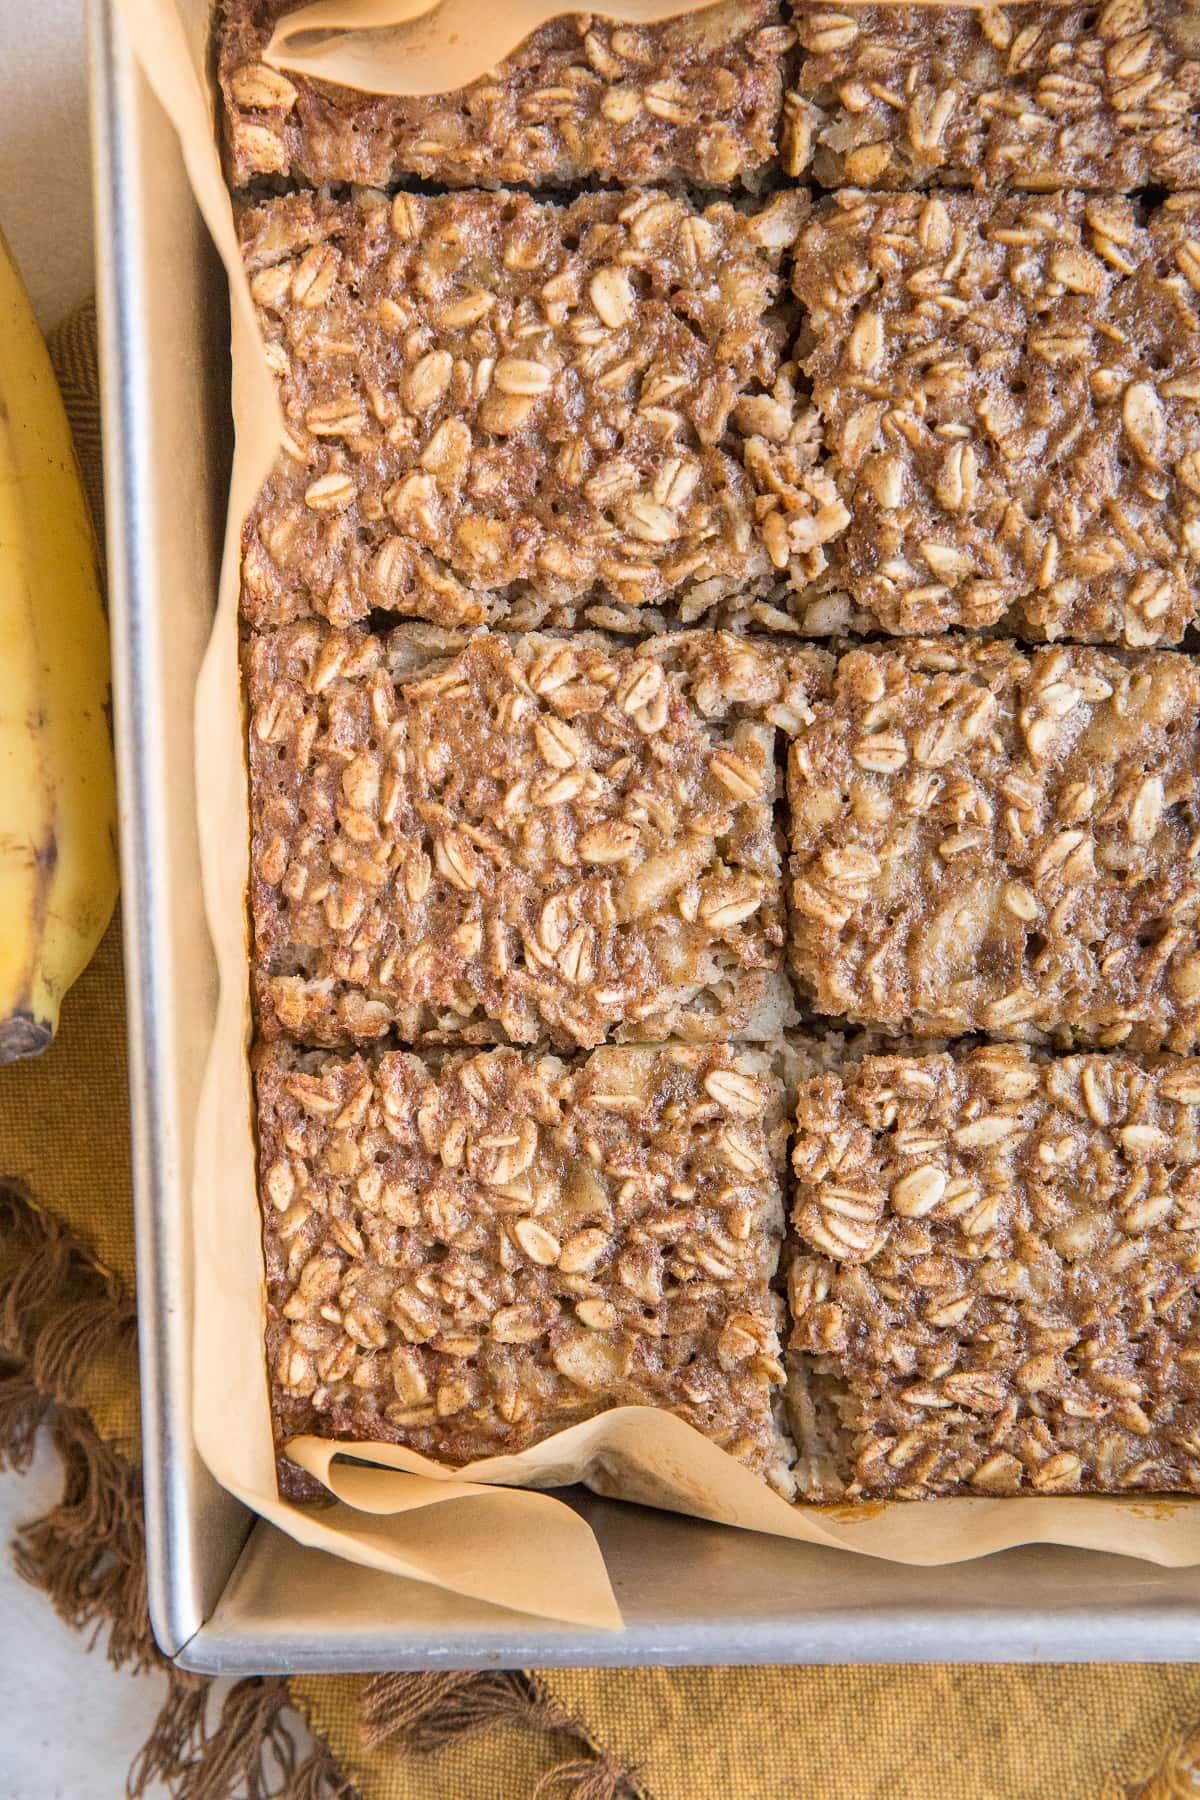 Baking pan with Banana Baked Oatmeal on top of a golden-brown napkin